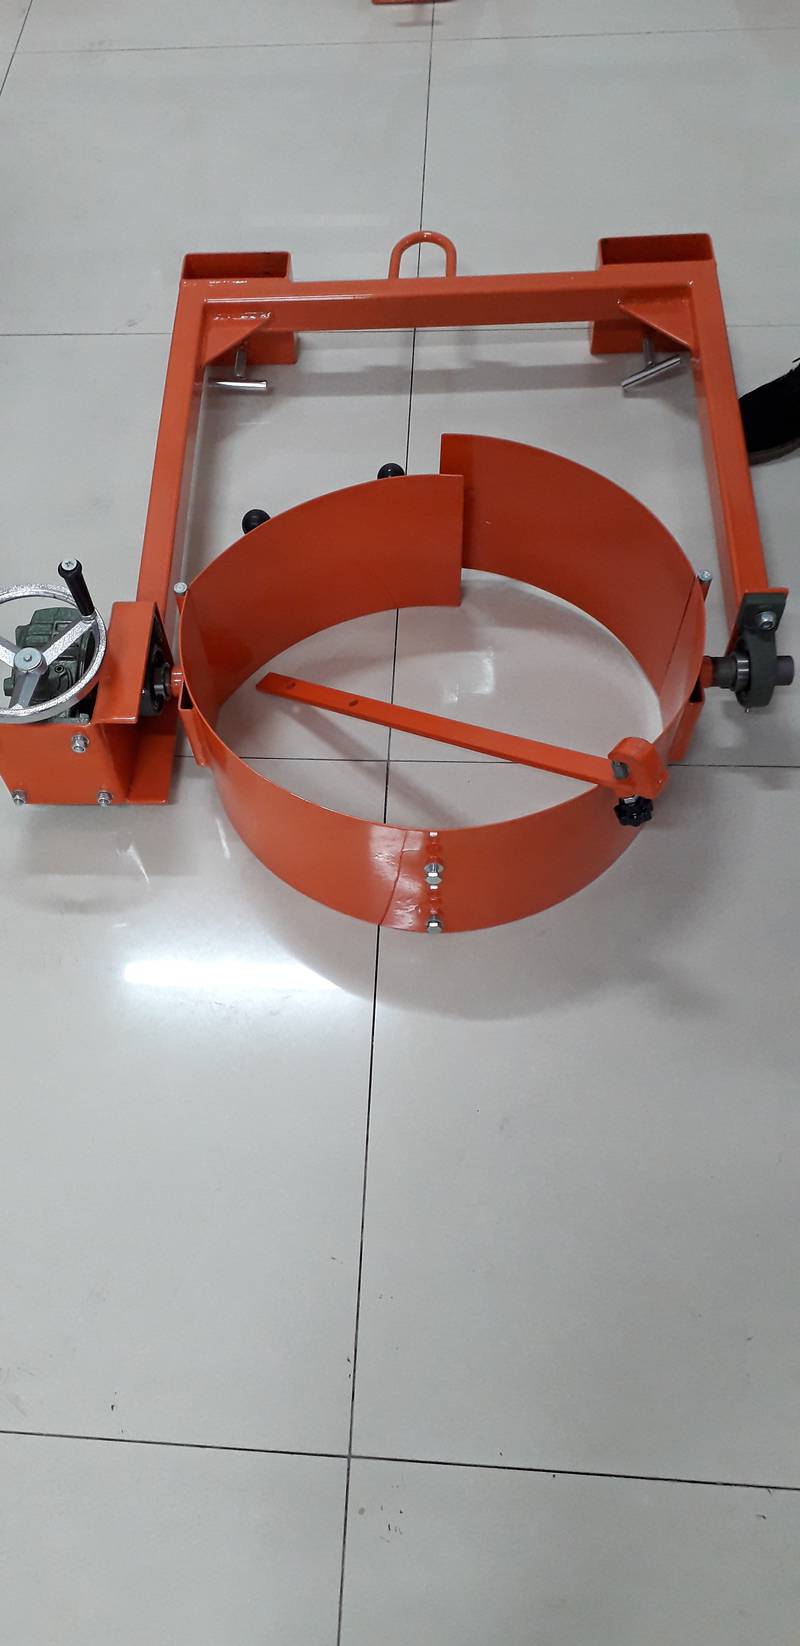 fork lifter attachment for drum lifting, drum fork lifter extention 18